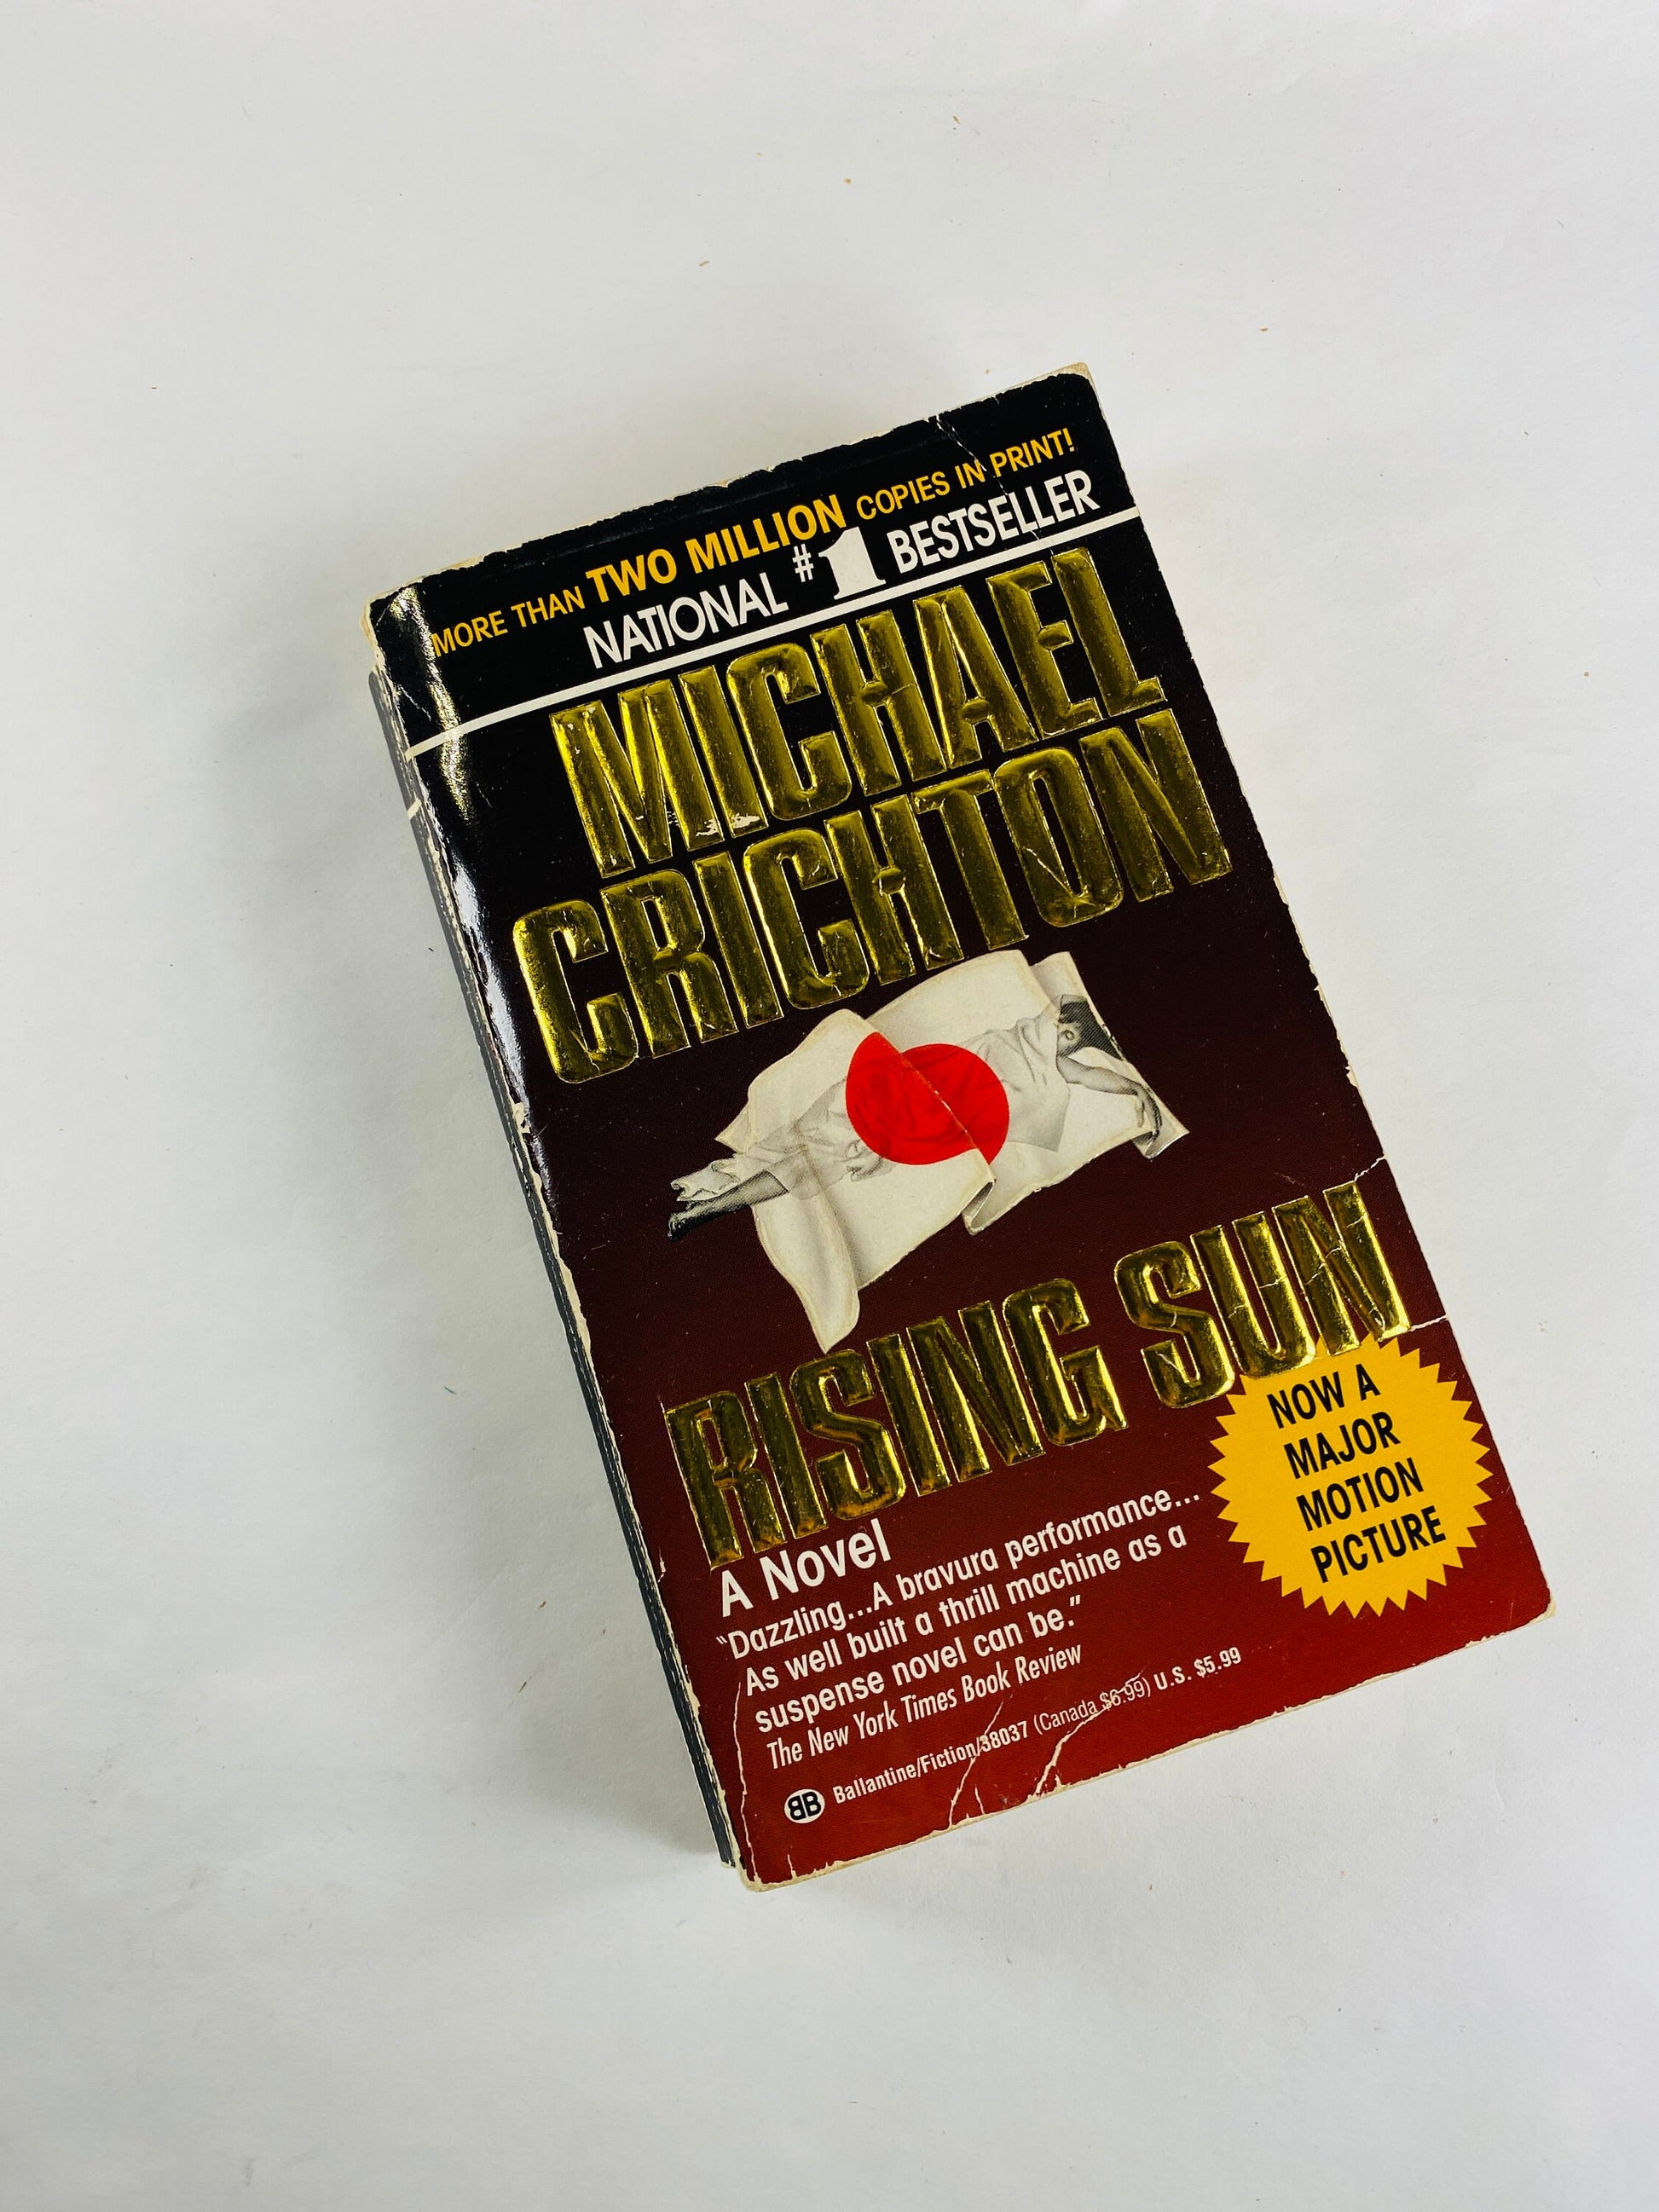 1993 Rising Sun by Michael Crichton vintage paperback book set in Japan business moguls compete for control of the electronics industry